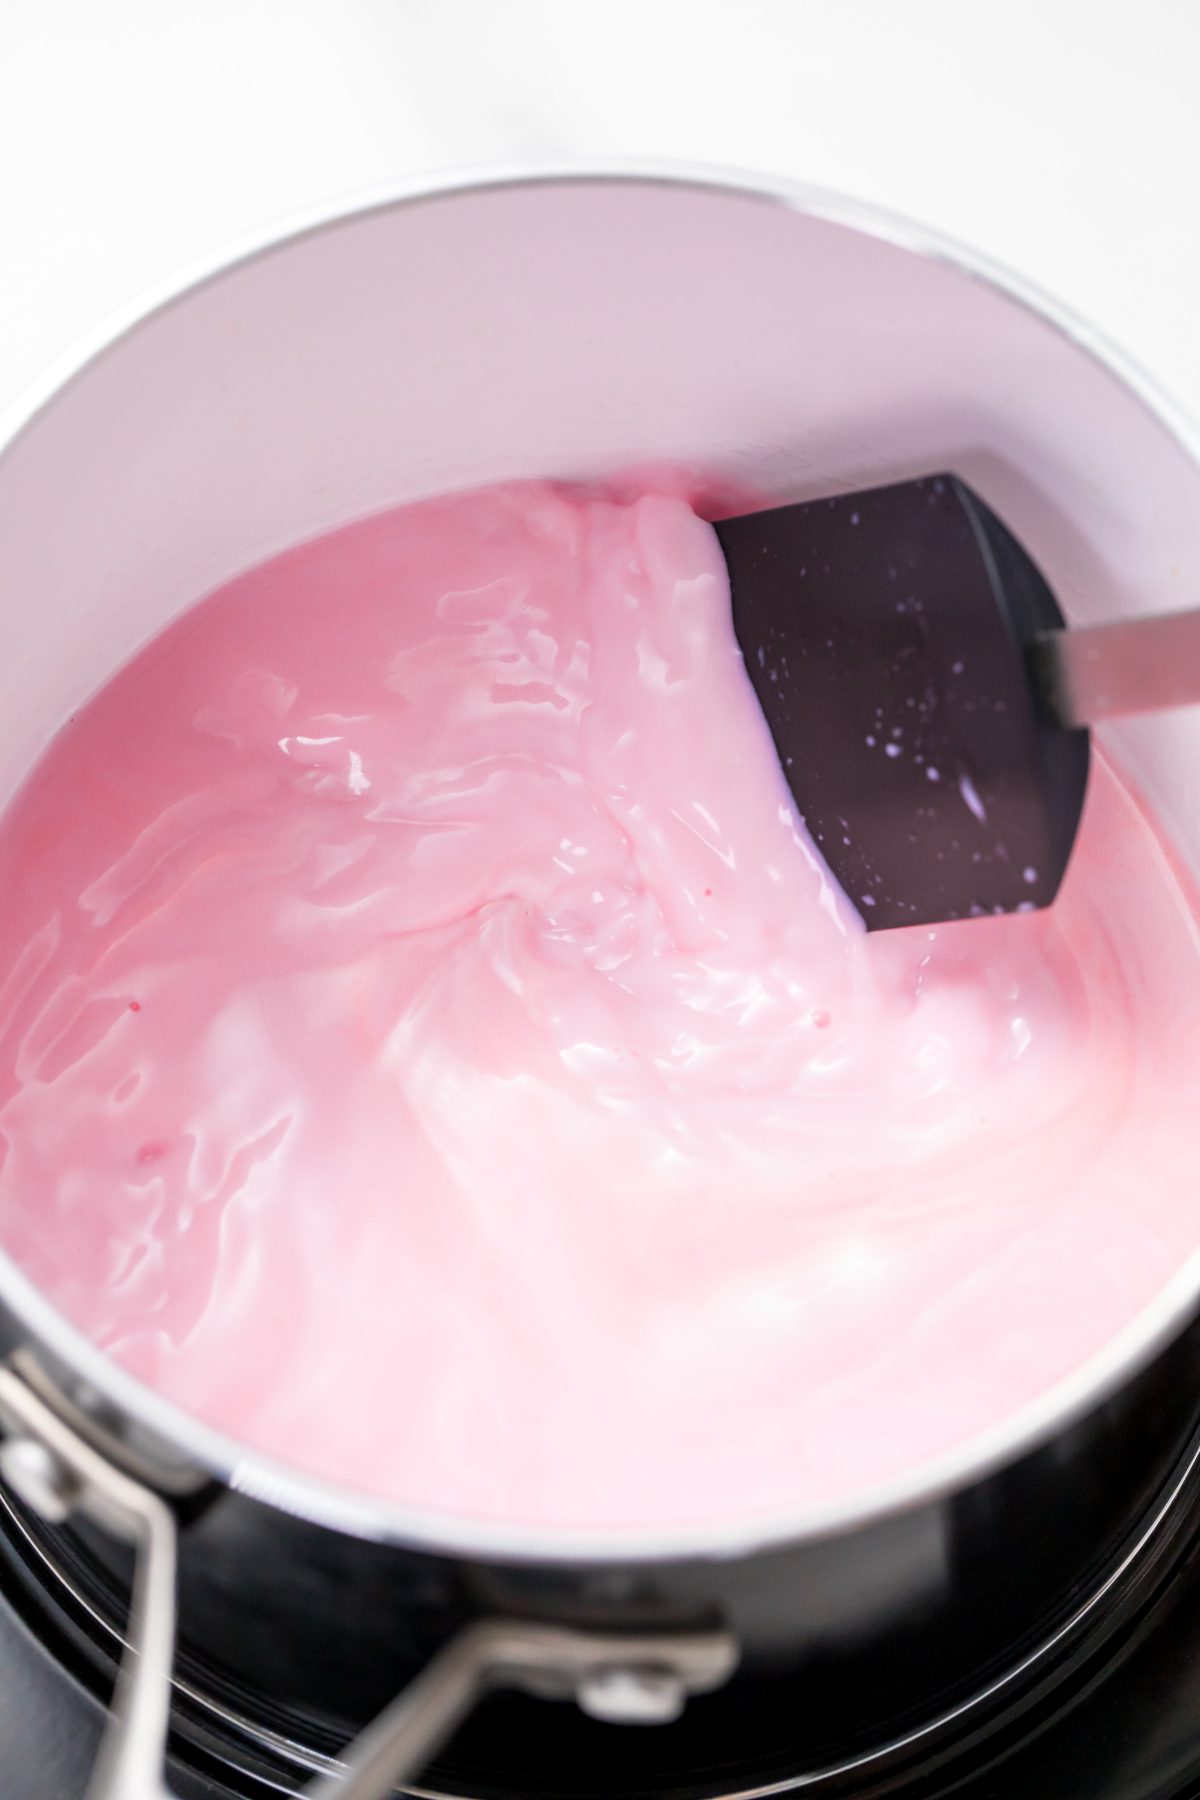 5D4B2998 - Unicorn Hot Chocolate - mixing milk with food coloring using a spatula in a pot